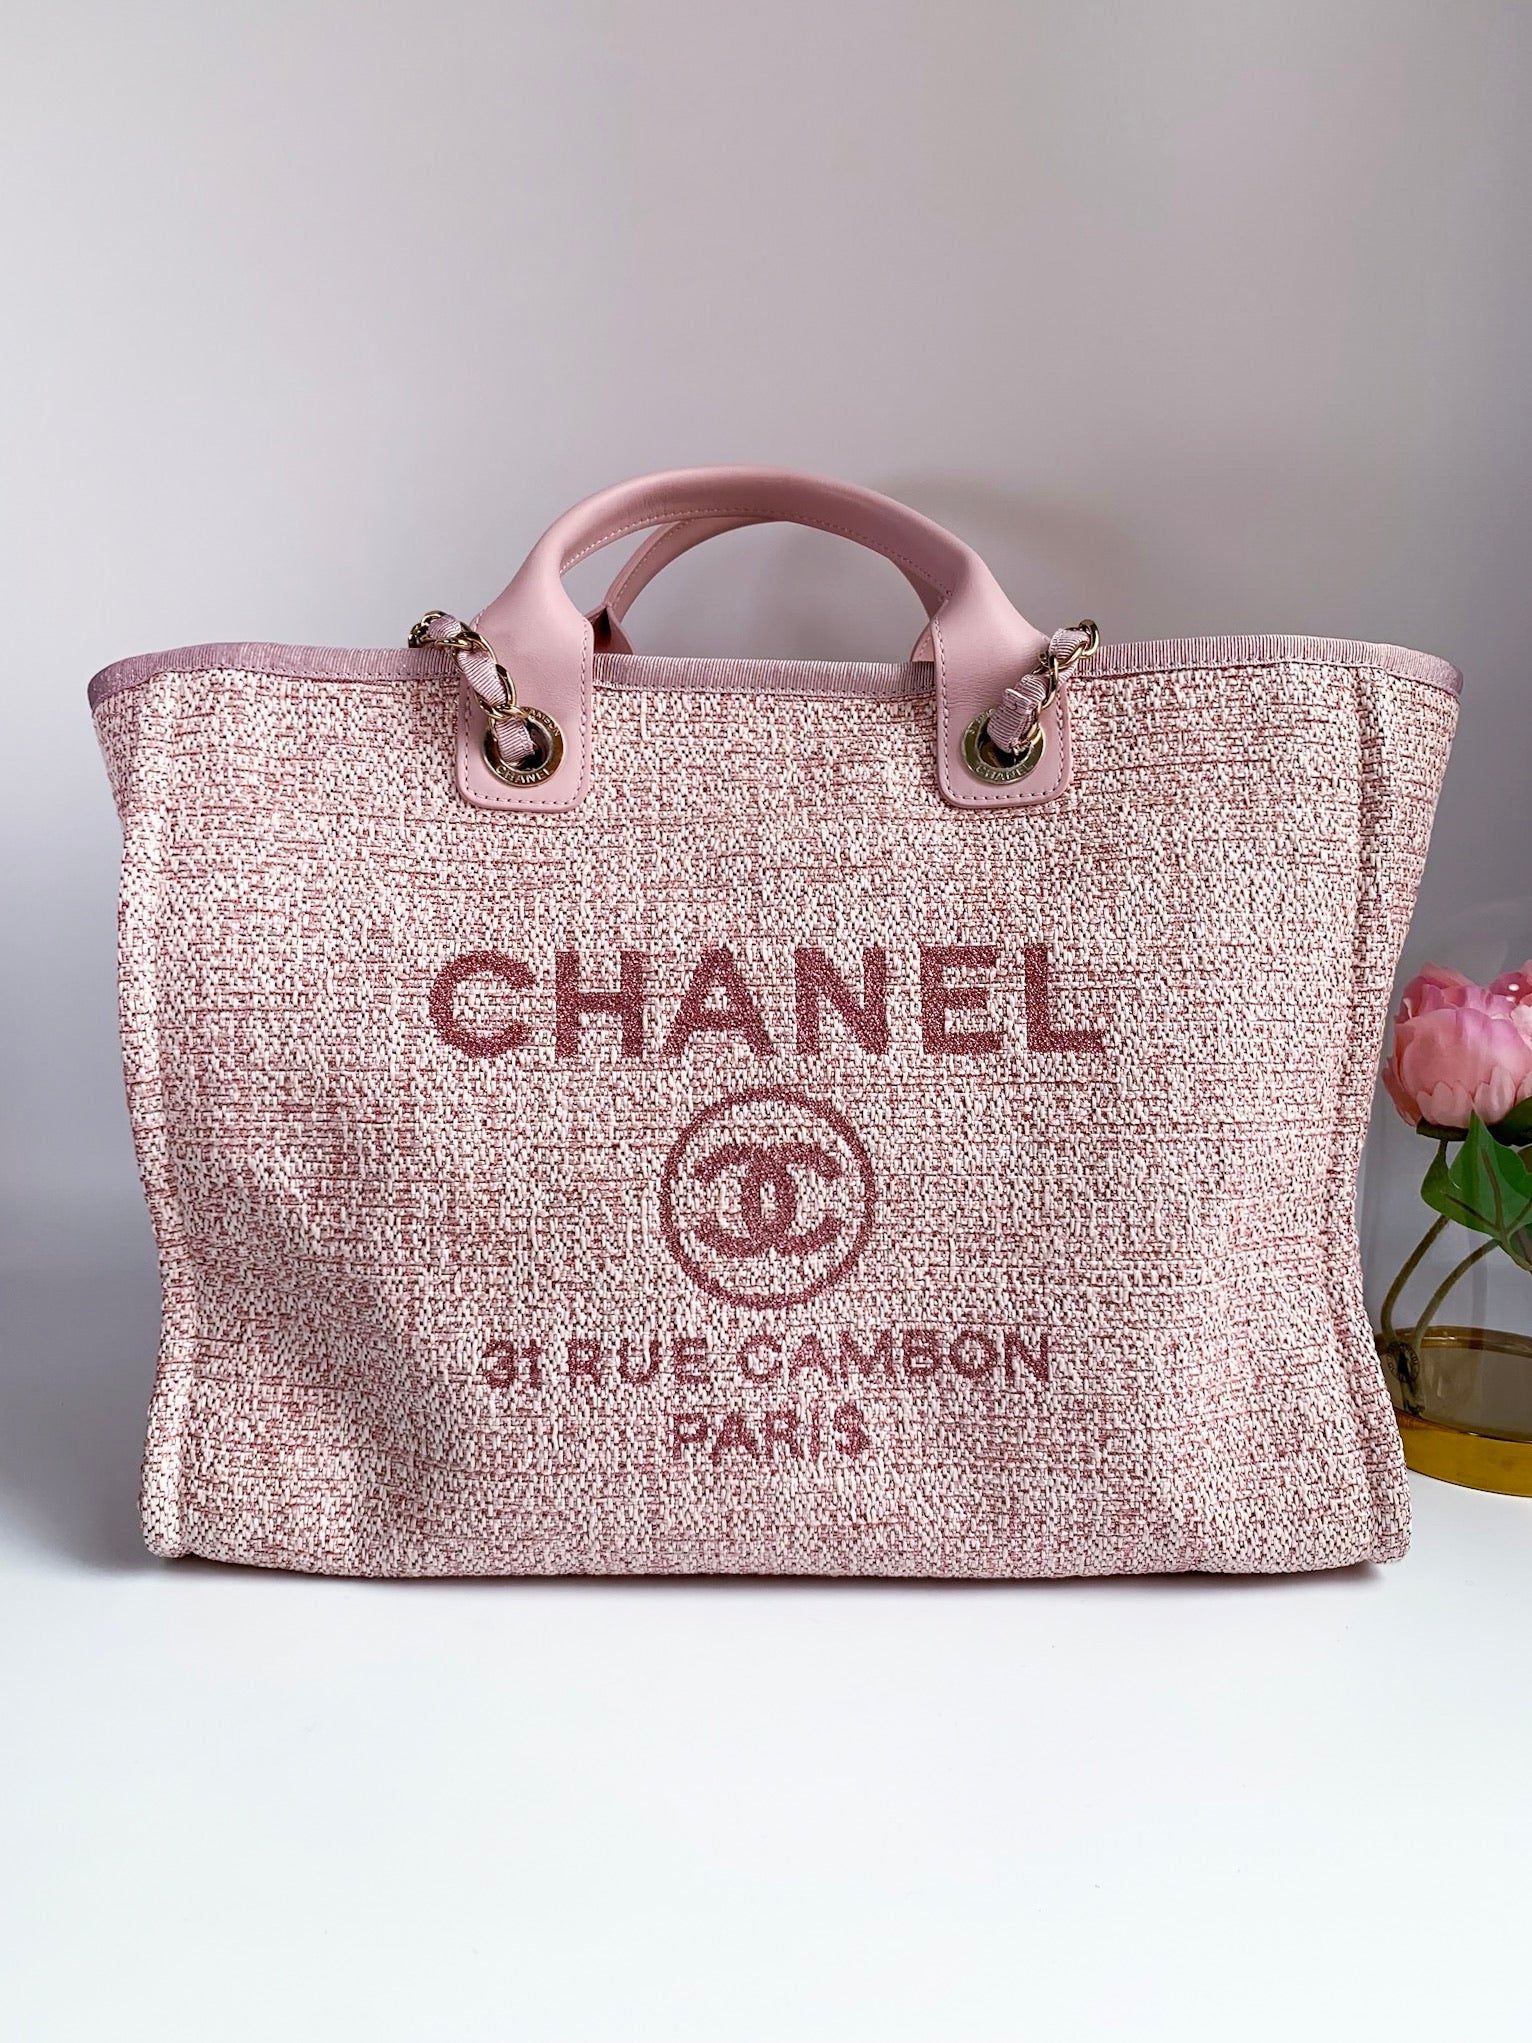 Chanel Deauville Large Tote